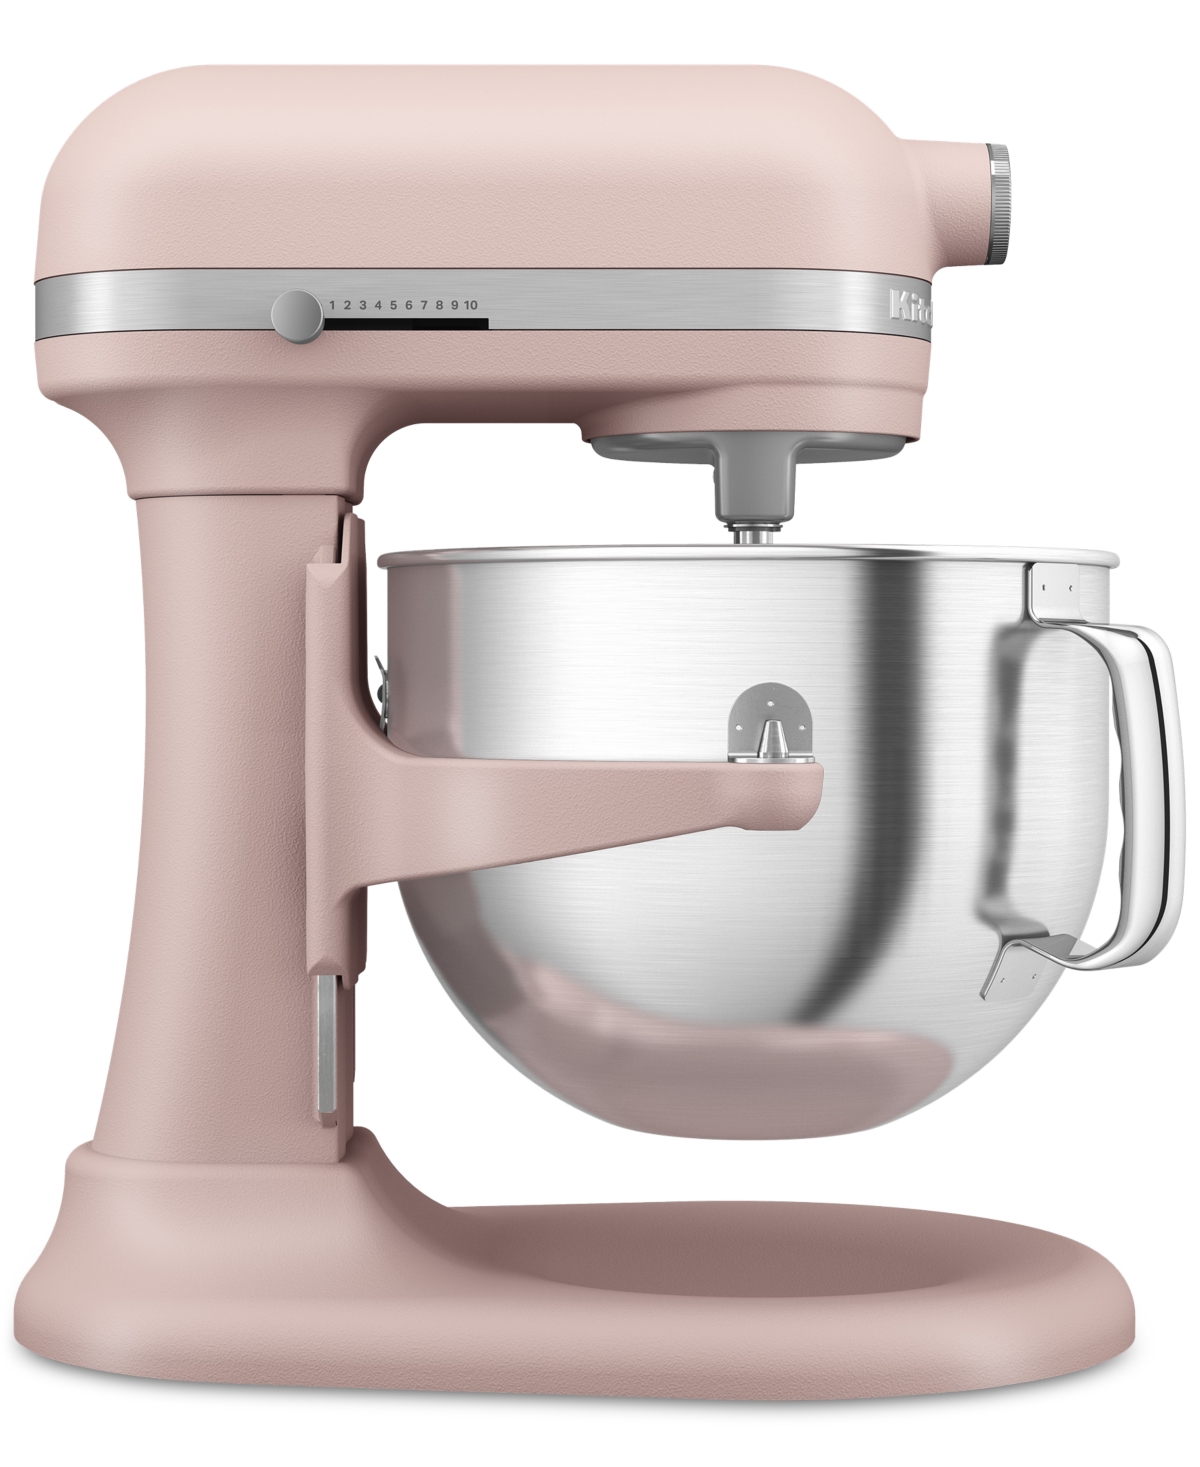 Kitchenaid 7-quart 11-speed Bowl-lift Stand Mixer In Feather Pink